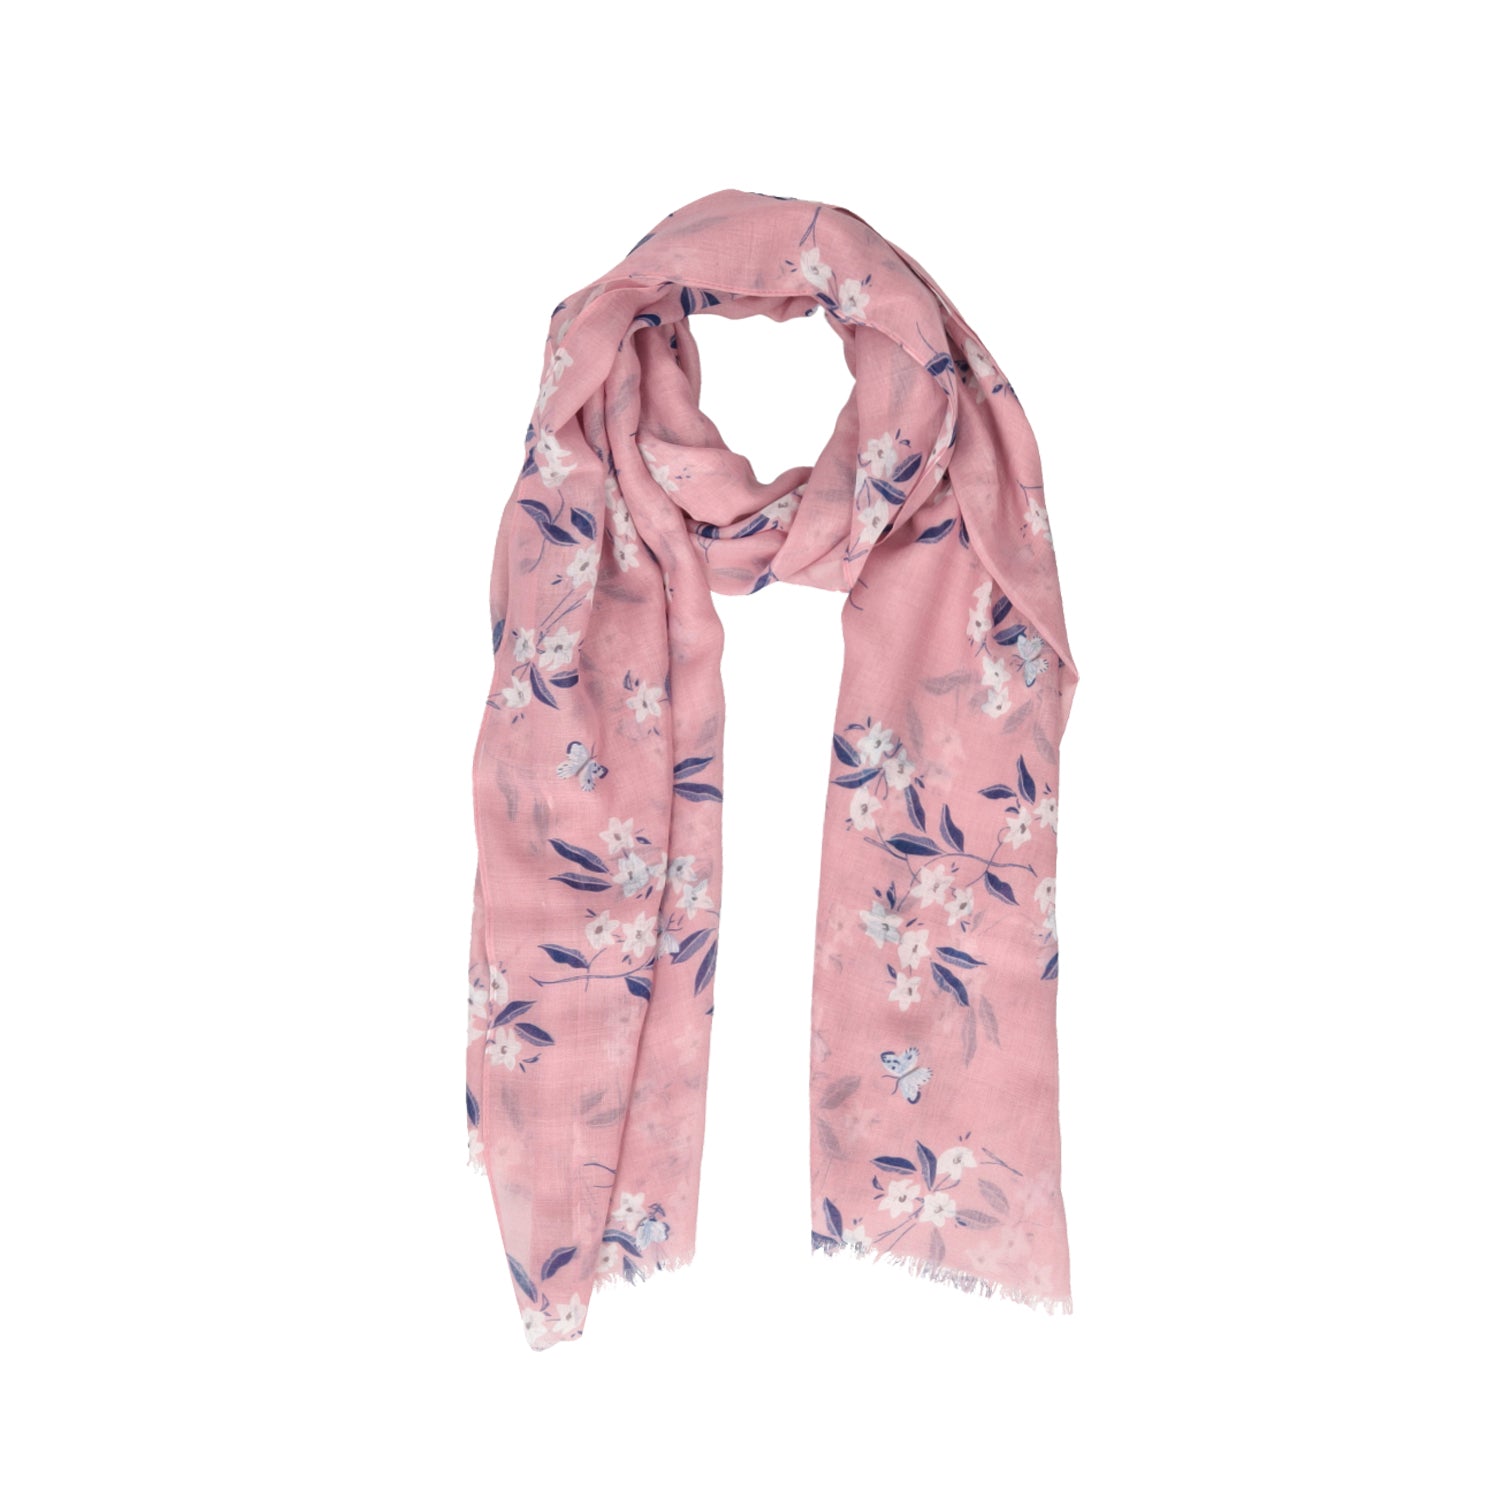 PINK AQUAMARINA SCARF WITH FLORAL PATTERN